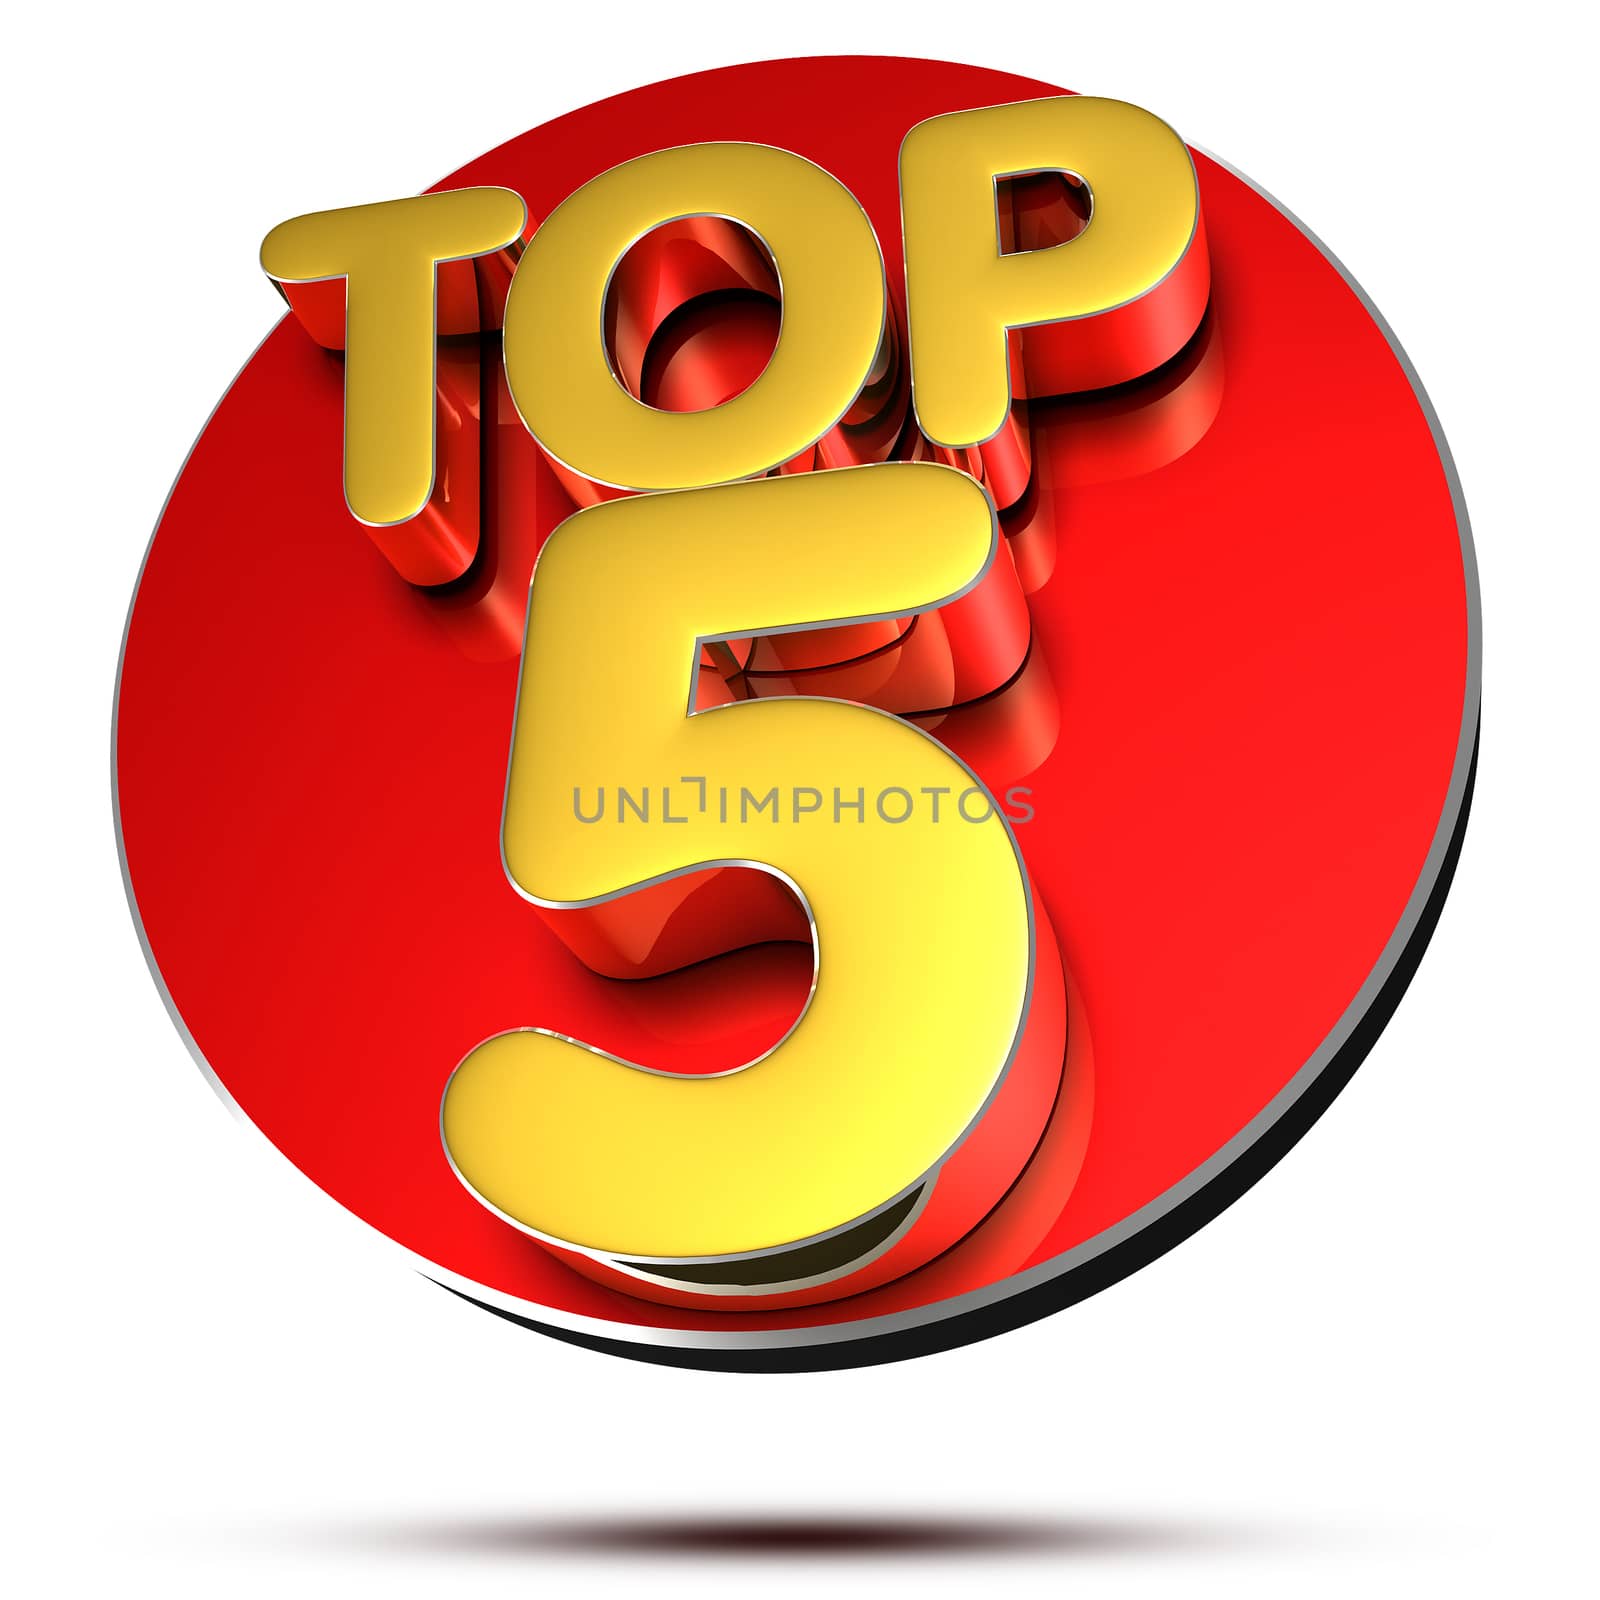 Top 5 3d rendering on white background.(with Clipping Path).